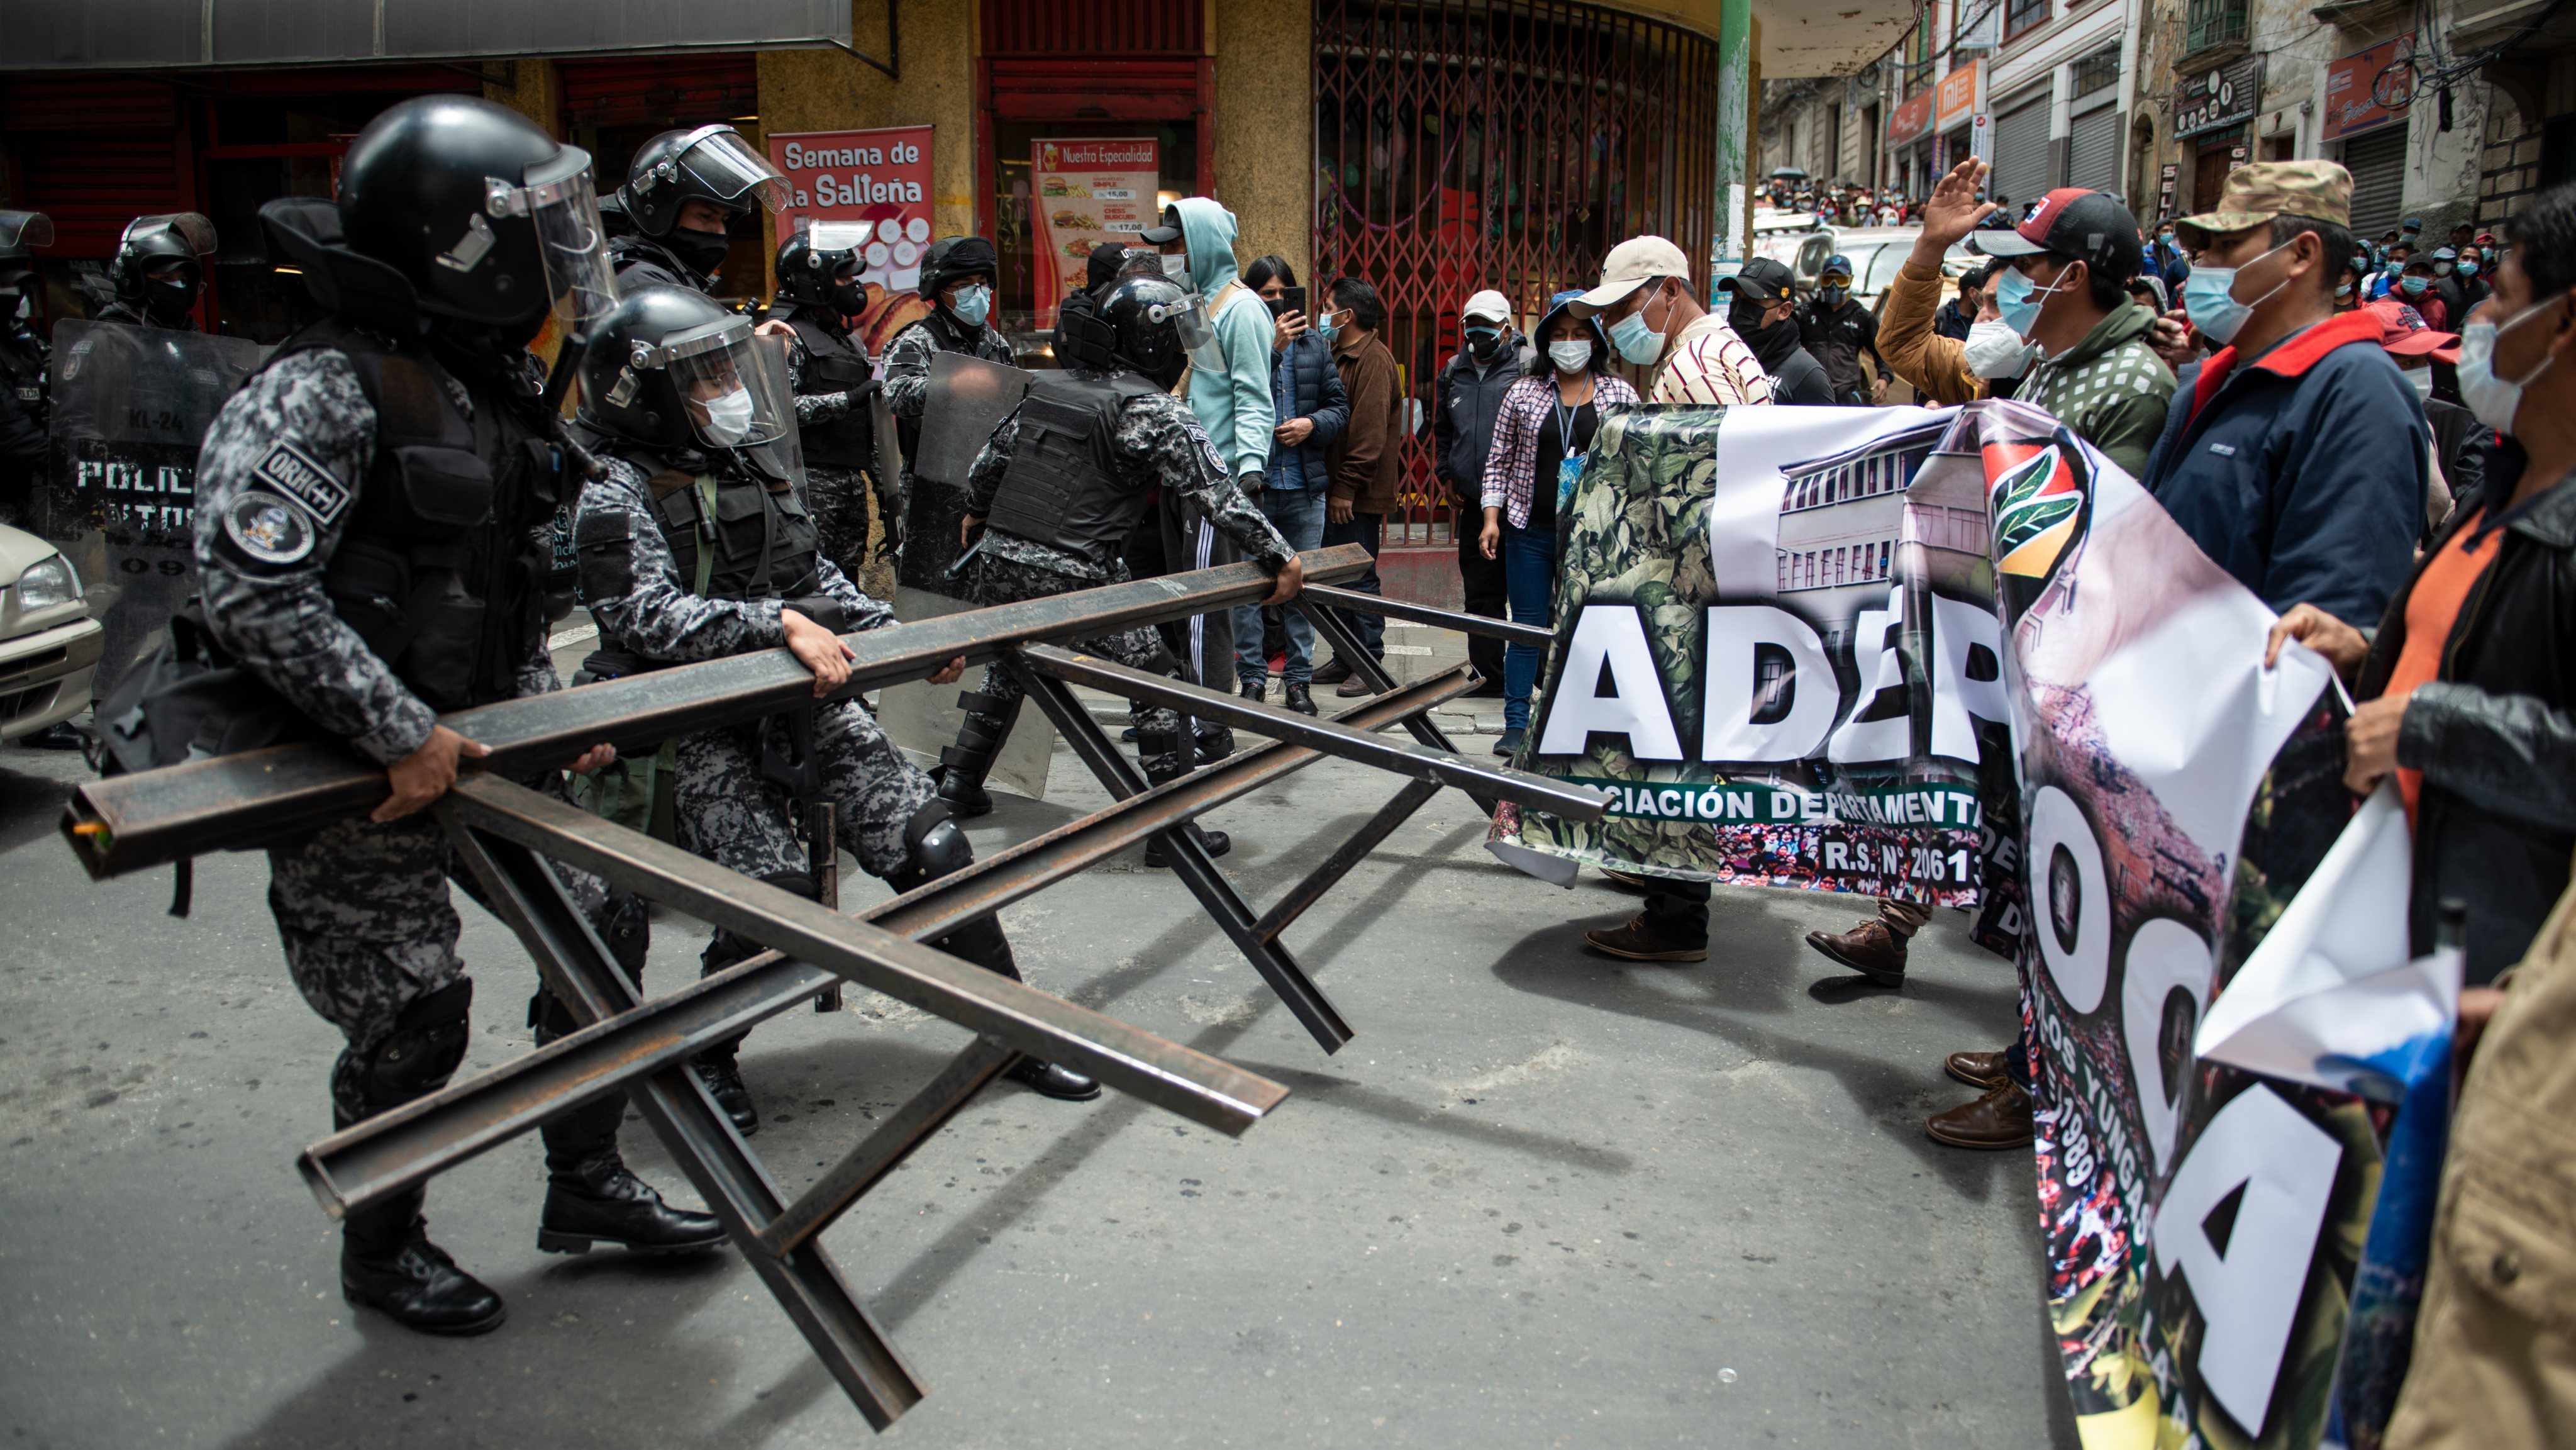 Protest by coca producers in Bolivia